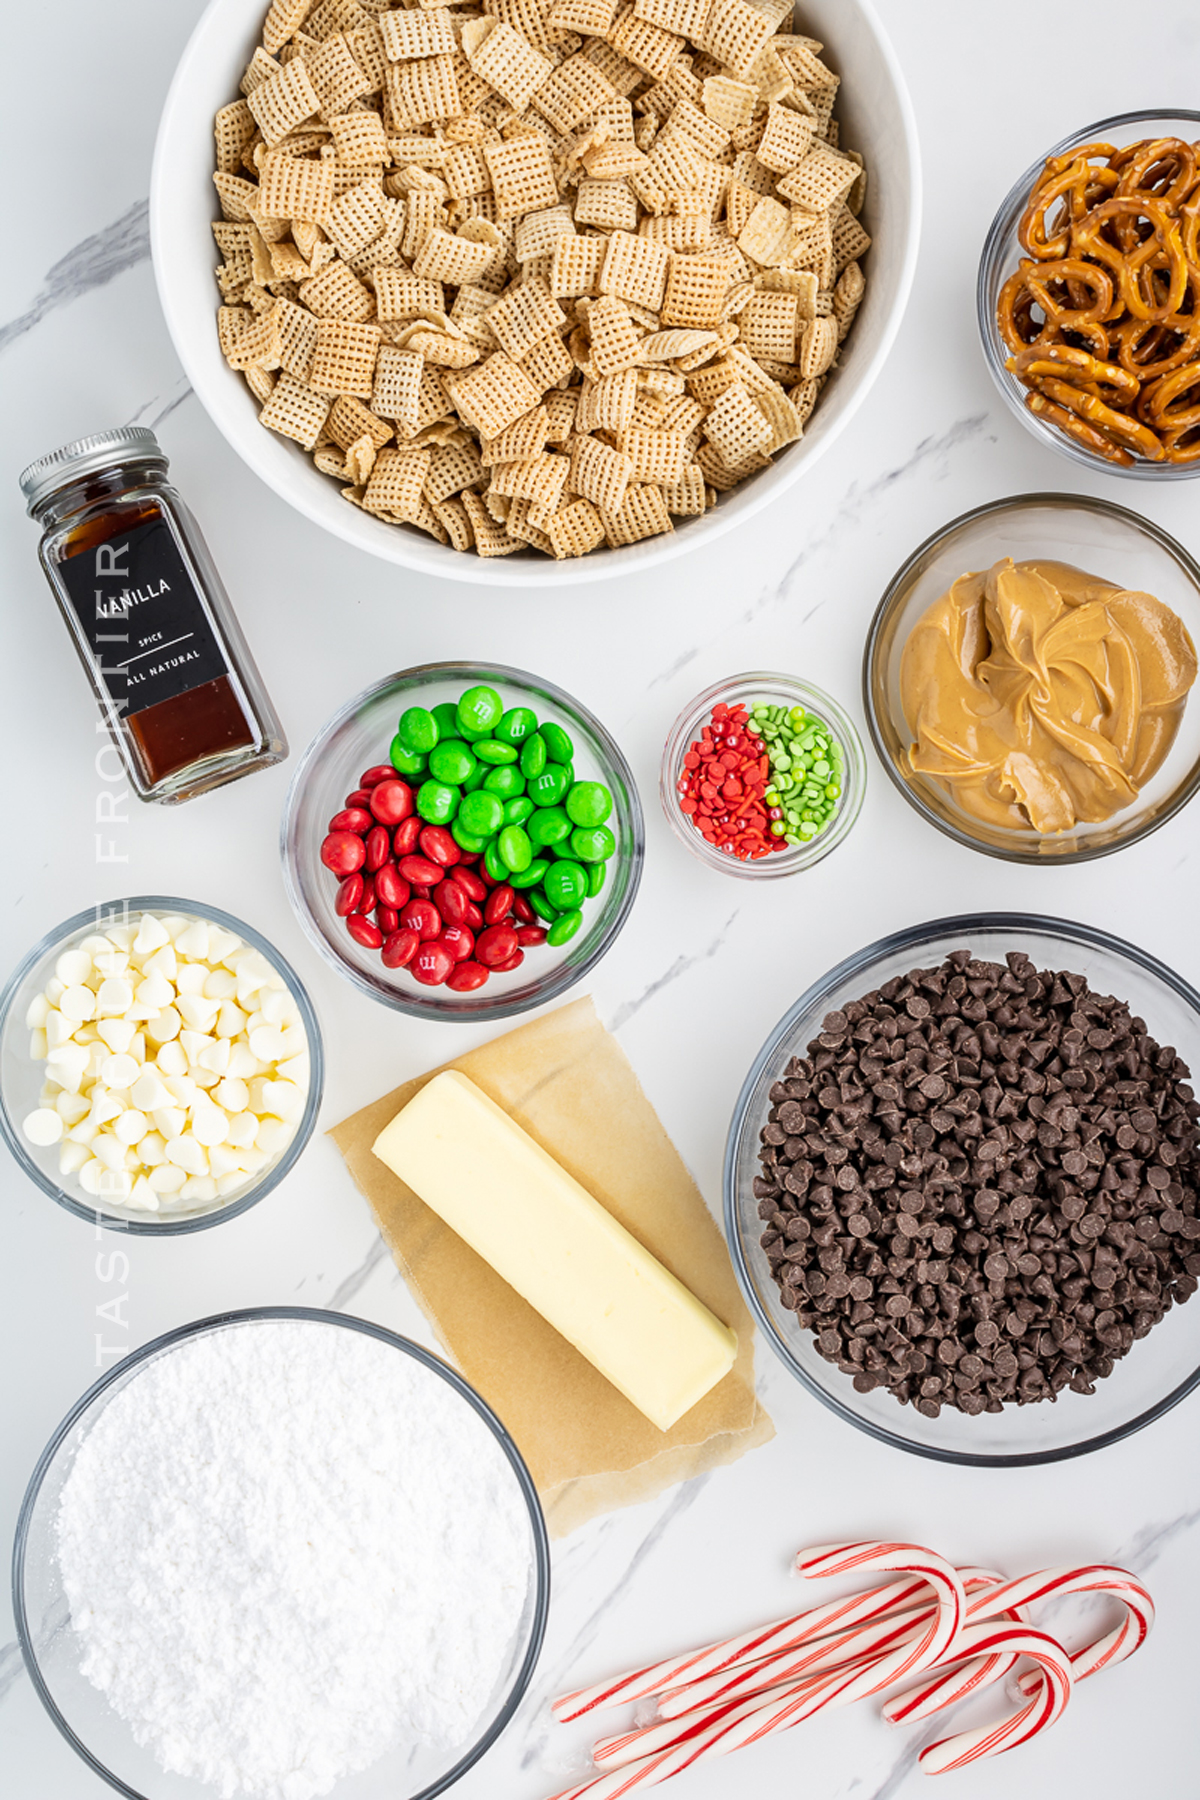 Ingredients for Christmas Puppy Chow